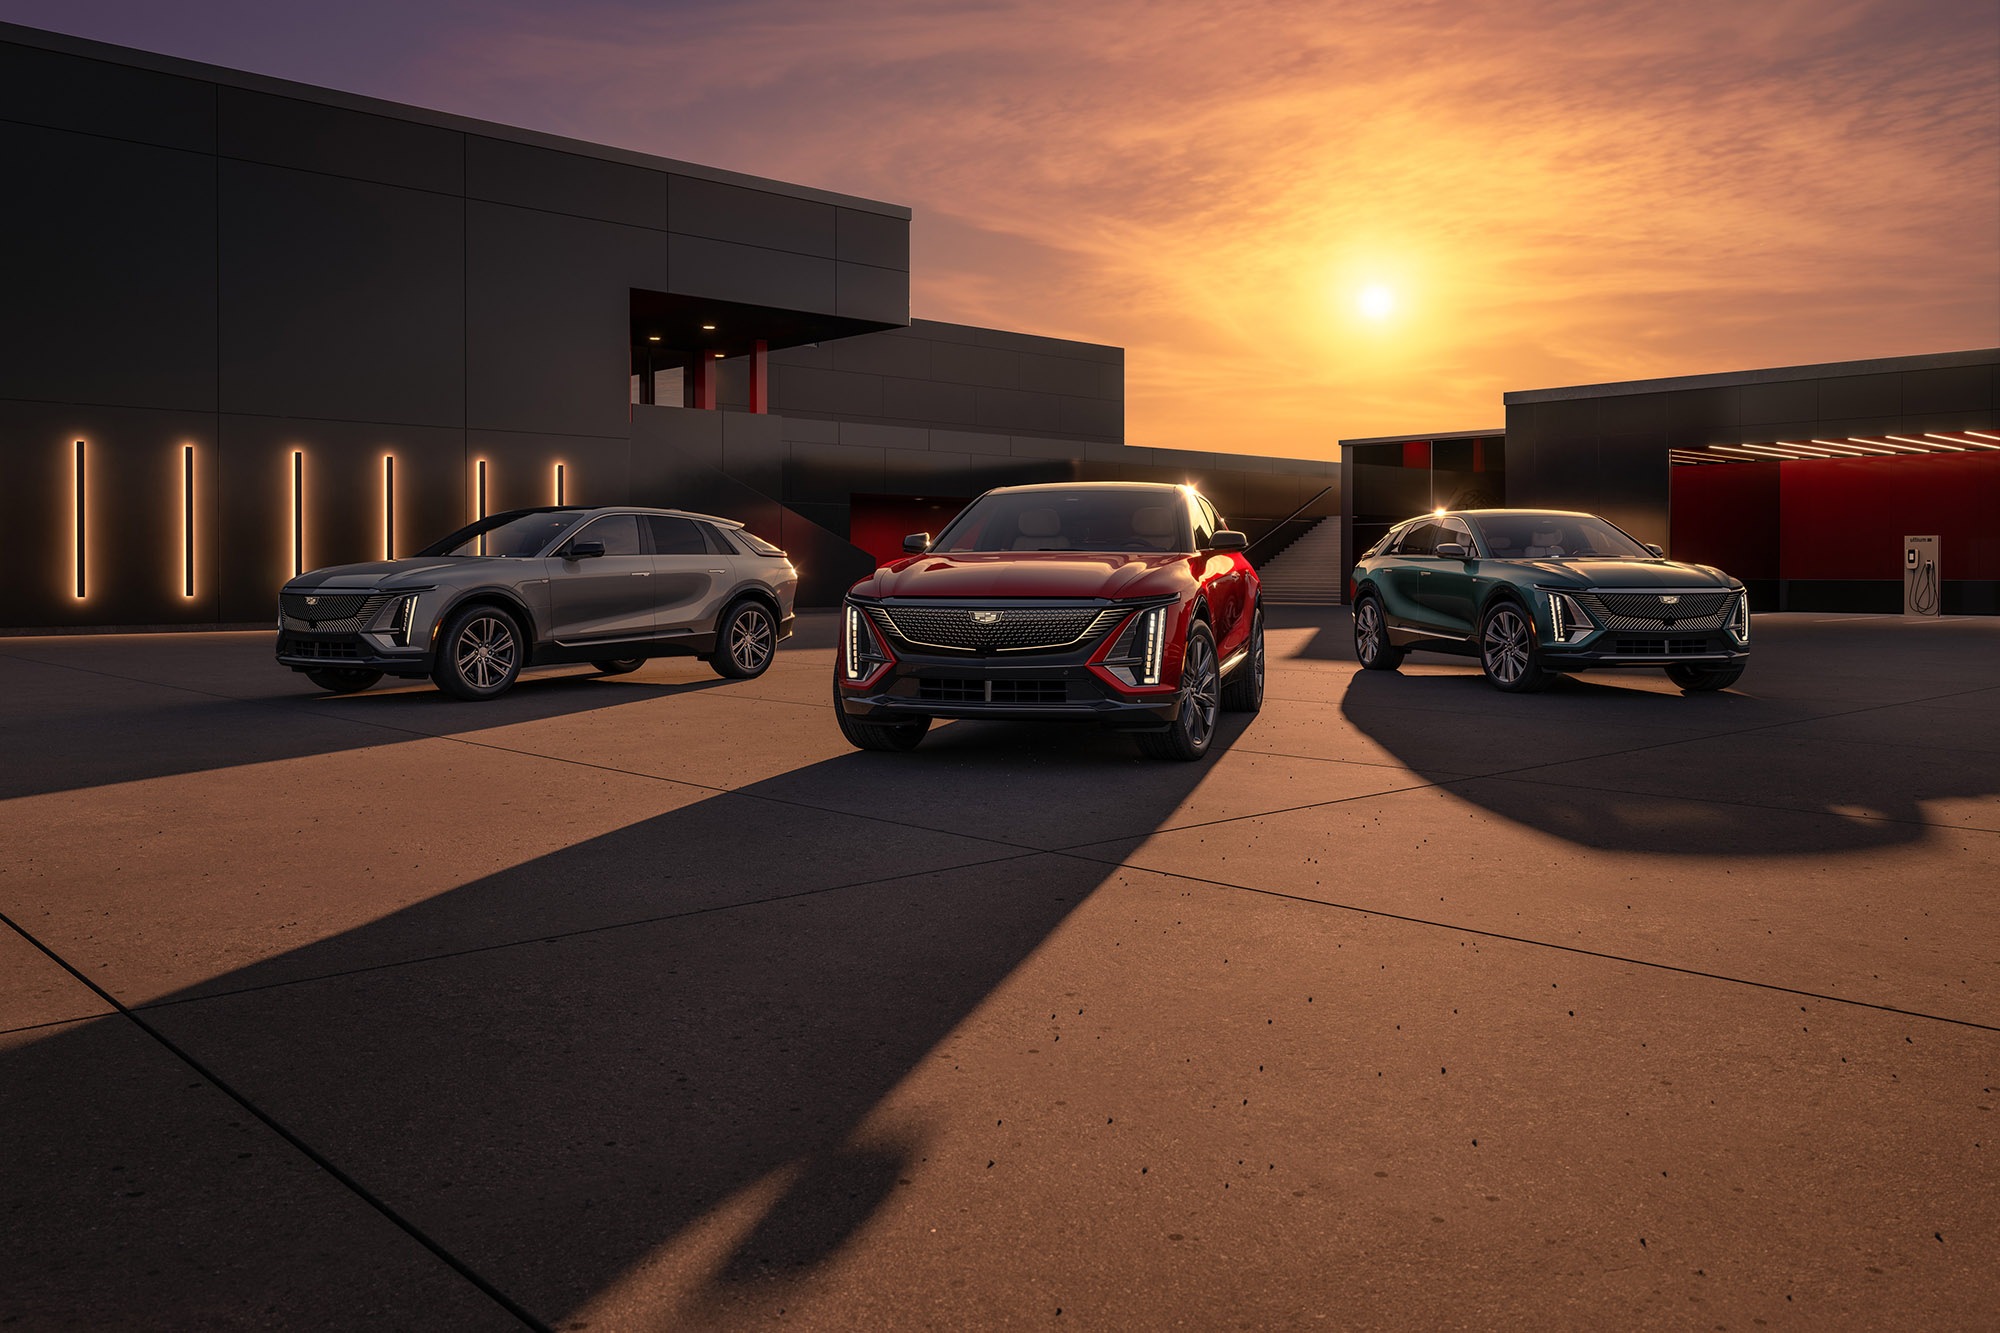 2024 Cadillac Lyriqs in gray, red, and blue parked in front of a sunset.